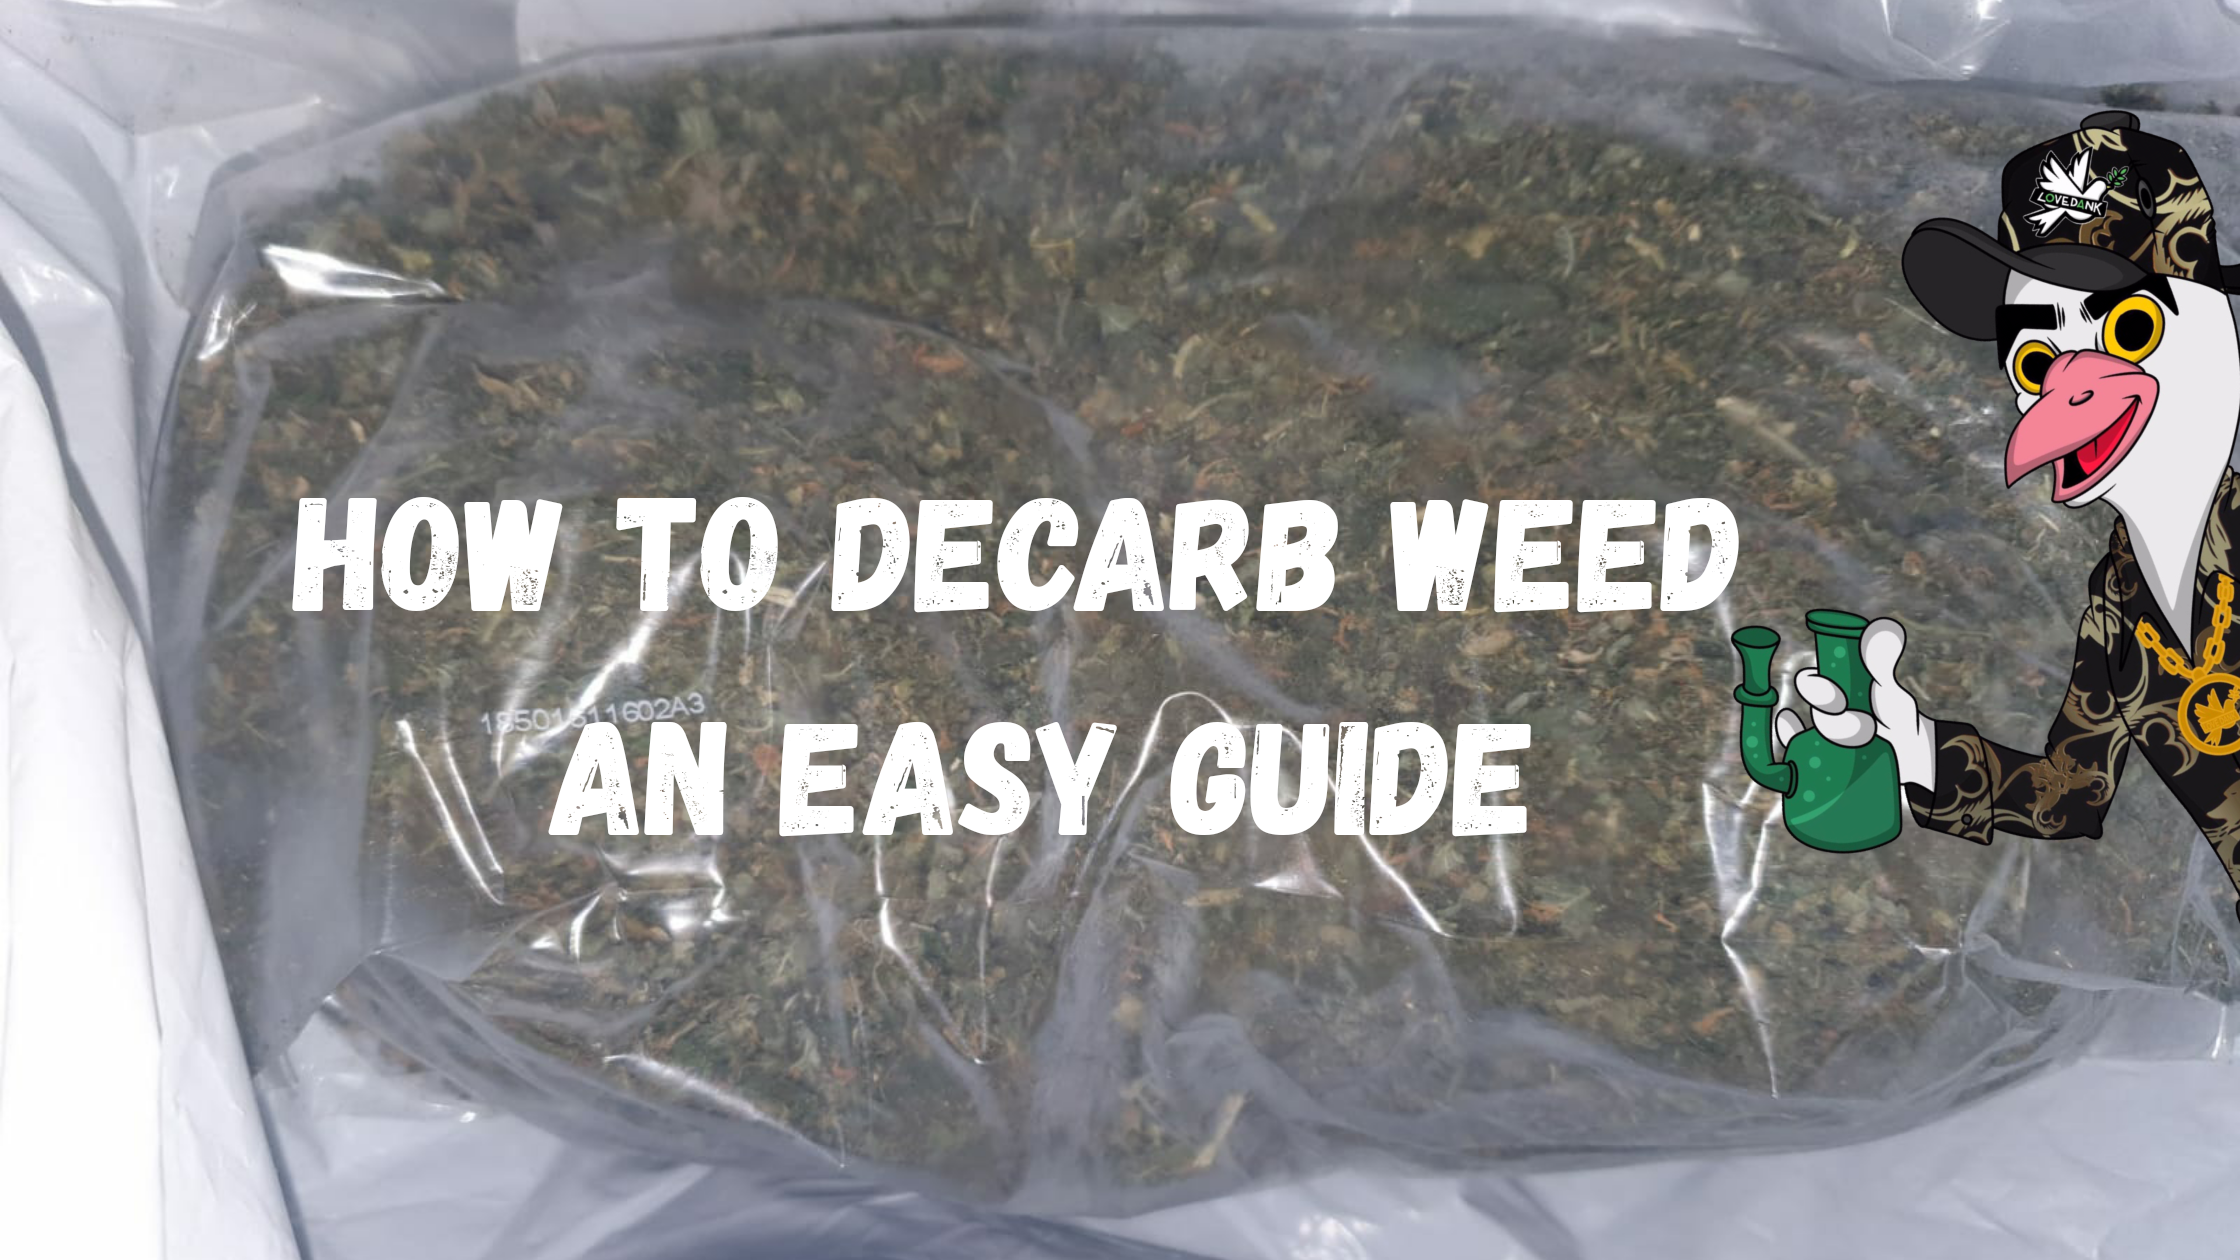 How to decarb weed